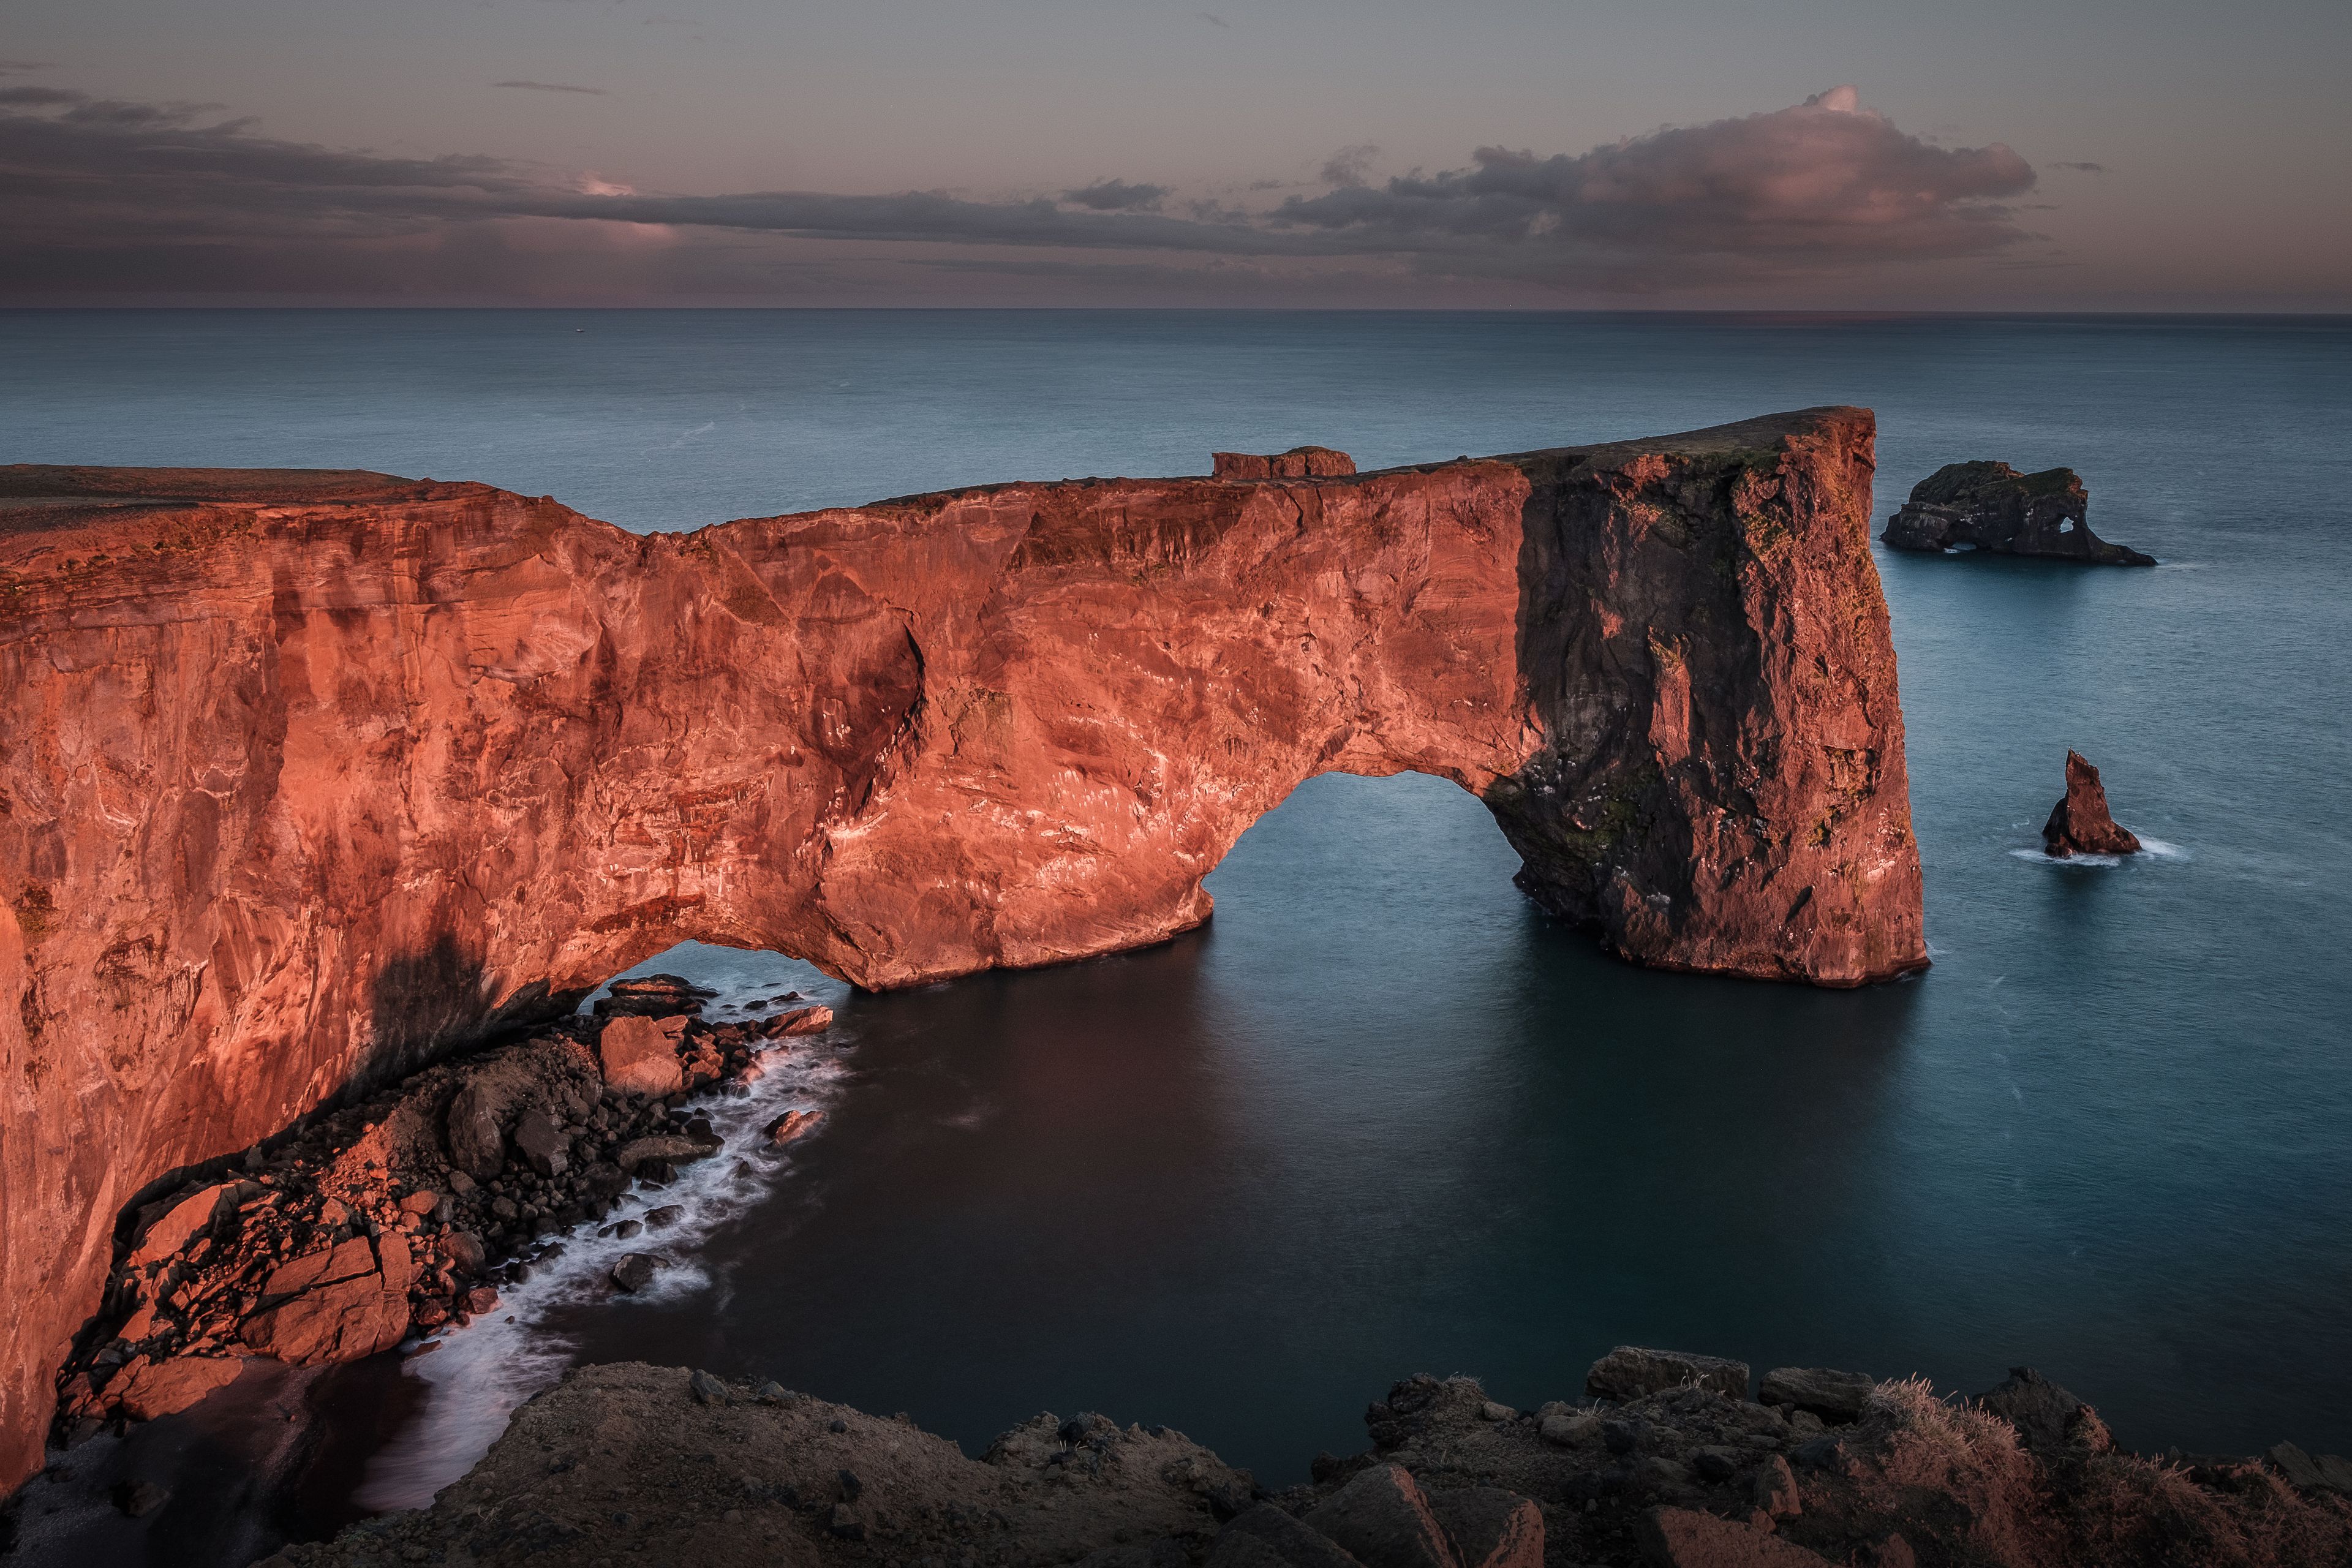 view on the beautiful rock arch at Dyrholaey, Iceland. Dyrholaey means the hill island with the door hole